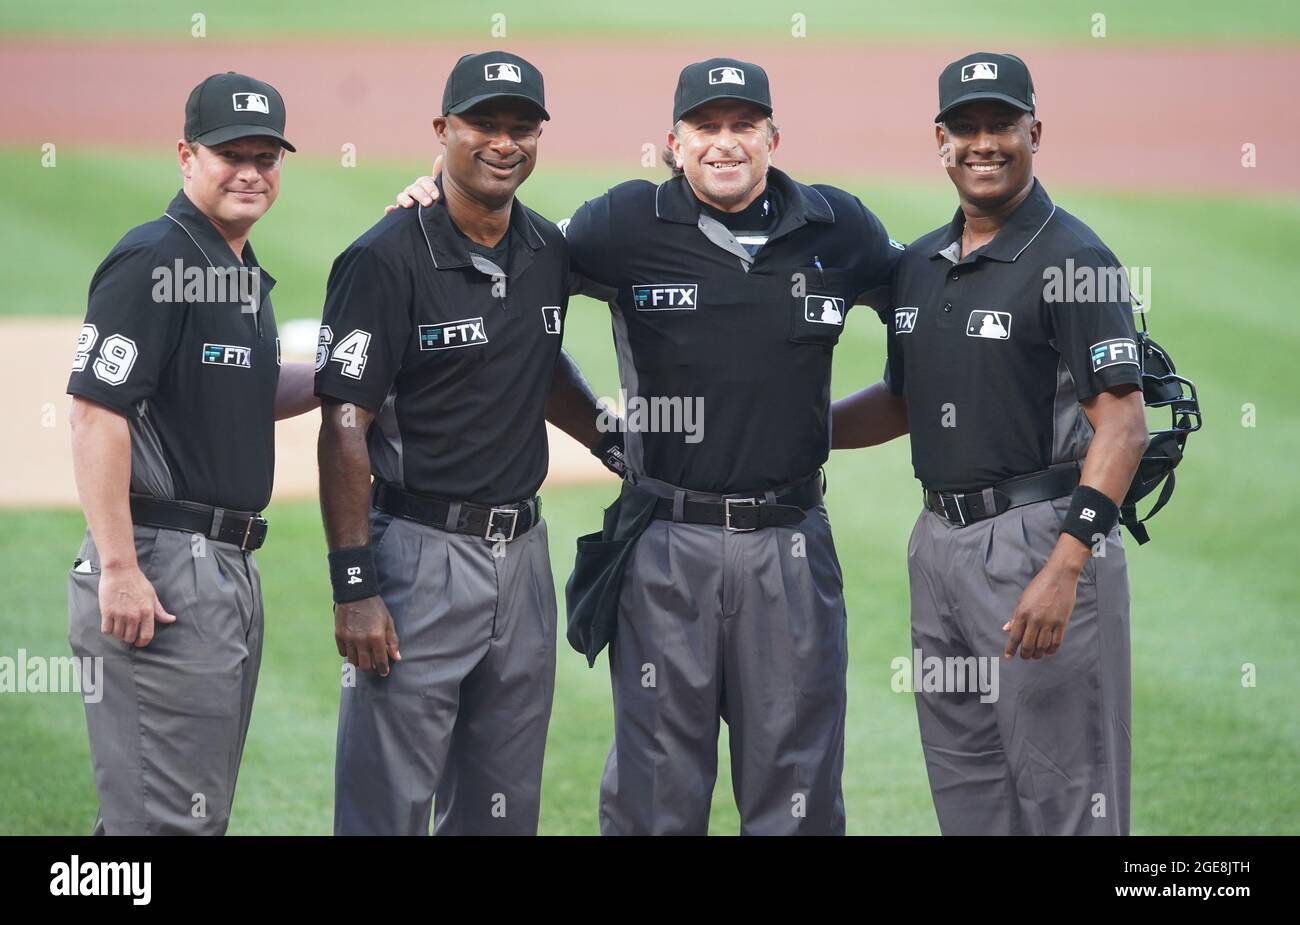 St. Louis, United States. 18th Aug, 2021. Major League Umpires (L to R) Sean Barber, Alan Porter, Chris Guccione and Ramon DeJesus pose for a photograph before the Milwaukee Brewers-St. Louis Cardinals baseball game at Busch Stadium in St. Louis on Tuesday, August 17, 2021. Photo by Bill Greenblatt/UPI Credit: UPI/Alamy Live News Stock Photo